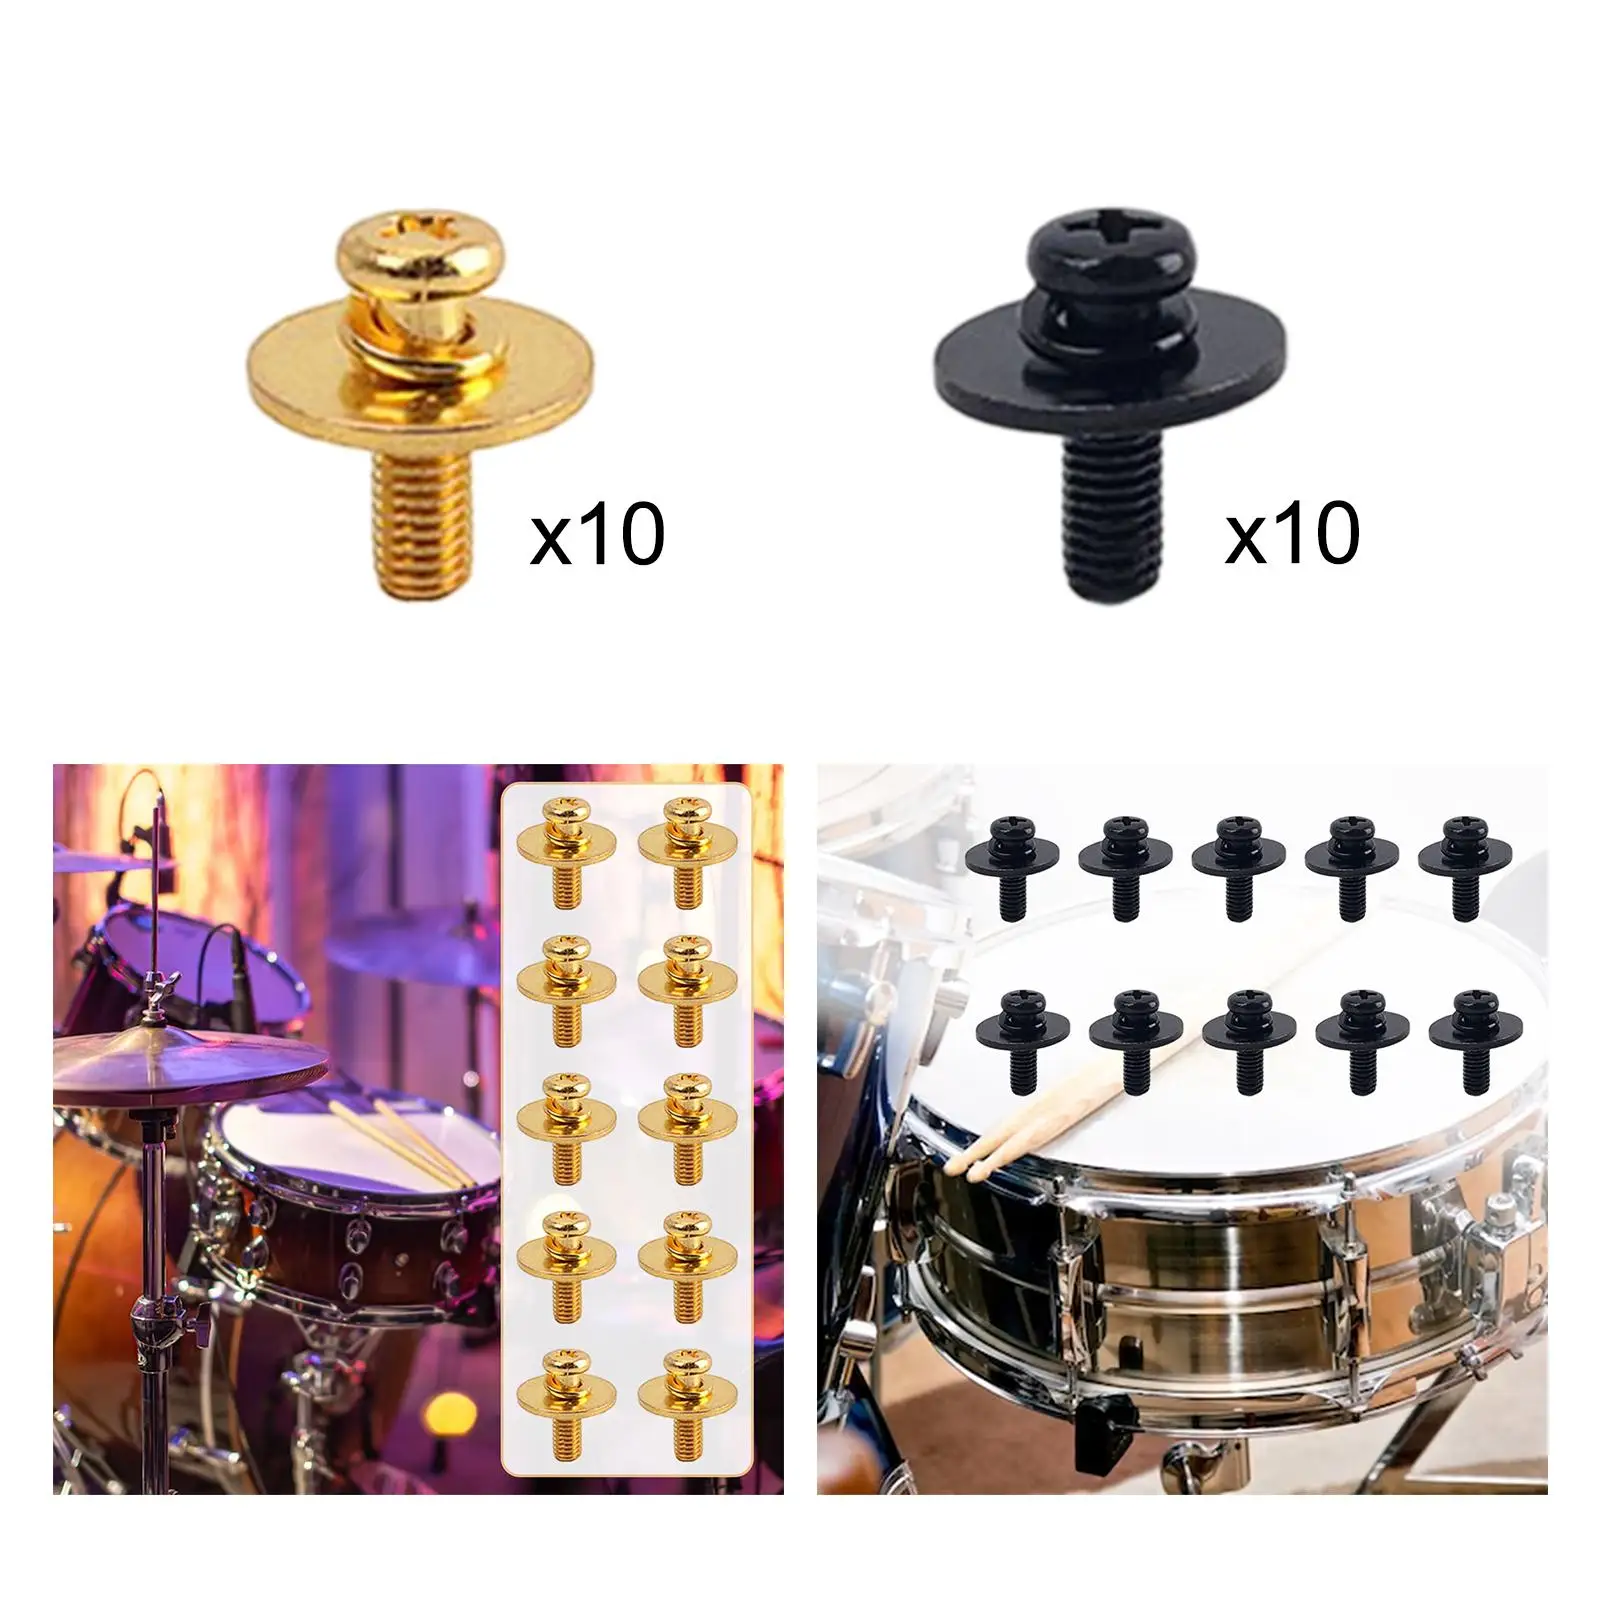 Metal Drum Lug Screws Drum Screw Drum Accessory Lug Claw Hook Snare Drum Lugs for Percussion Instrument Accessories Replacement